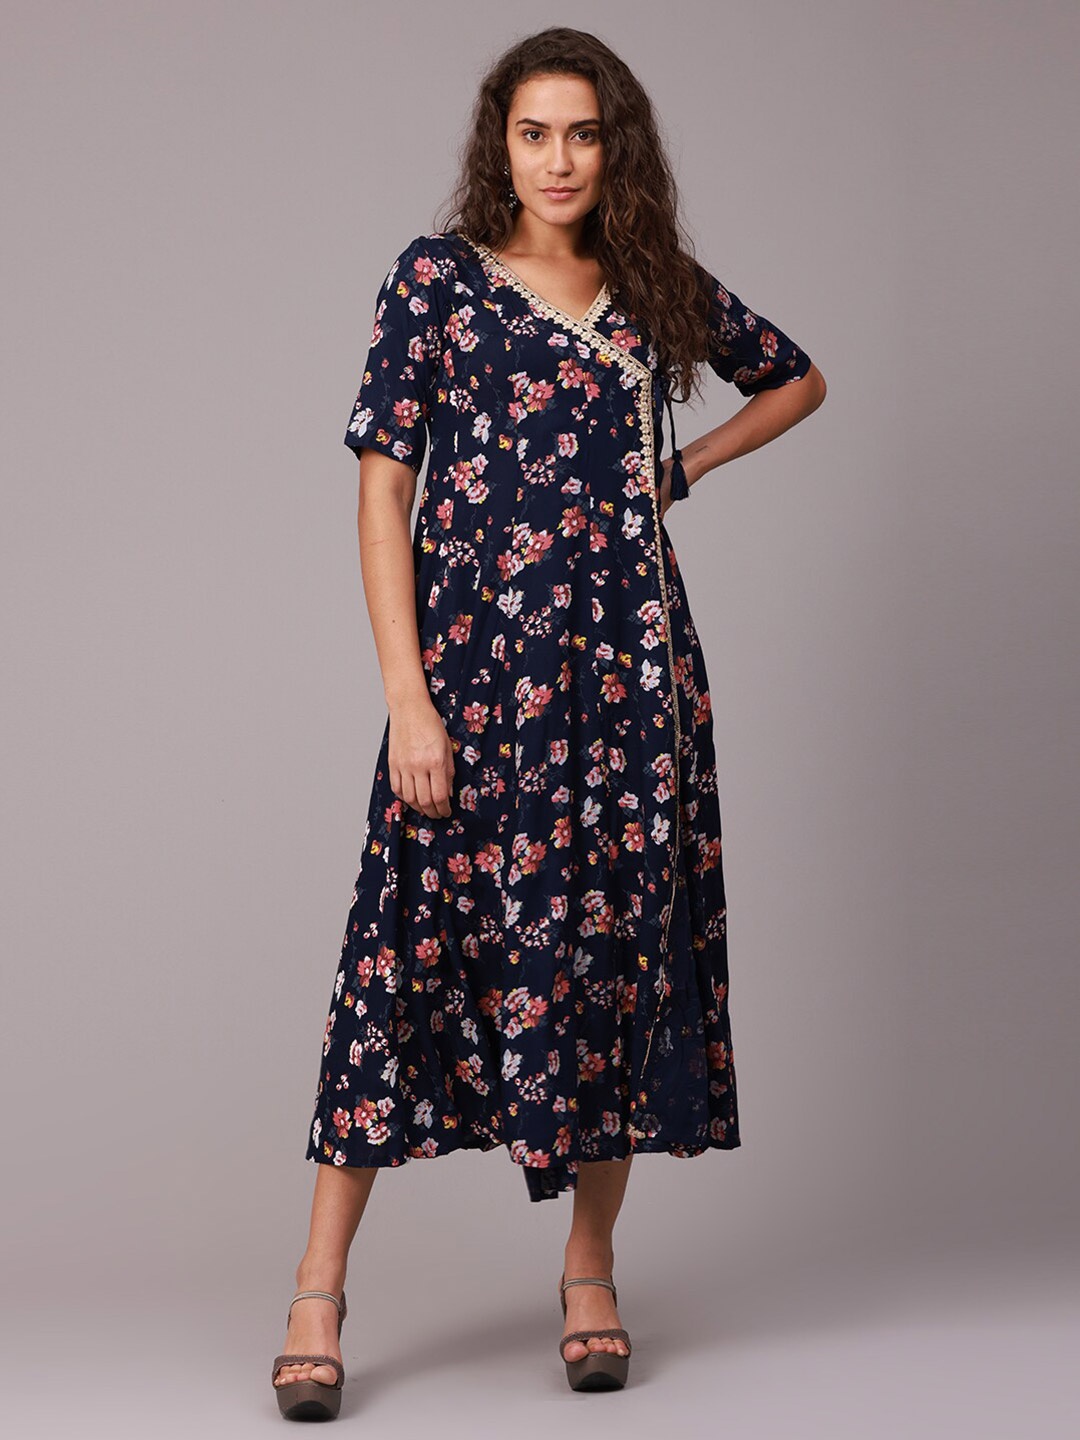 NAYRA Navy Blue Floral A-Line Midi Dress - buy at the price of $11.48 ...